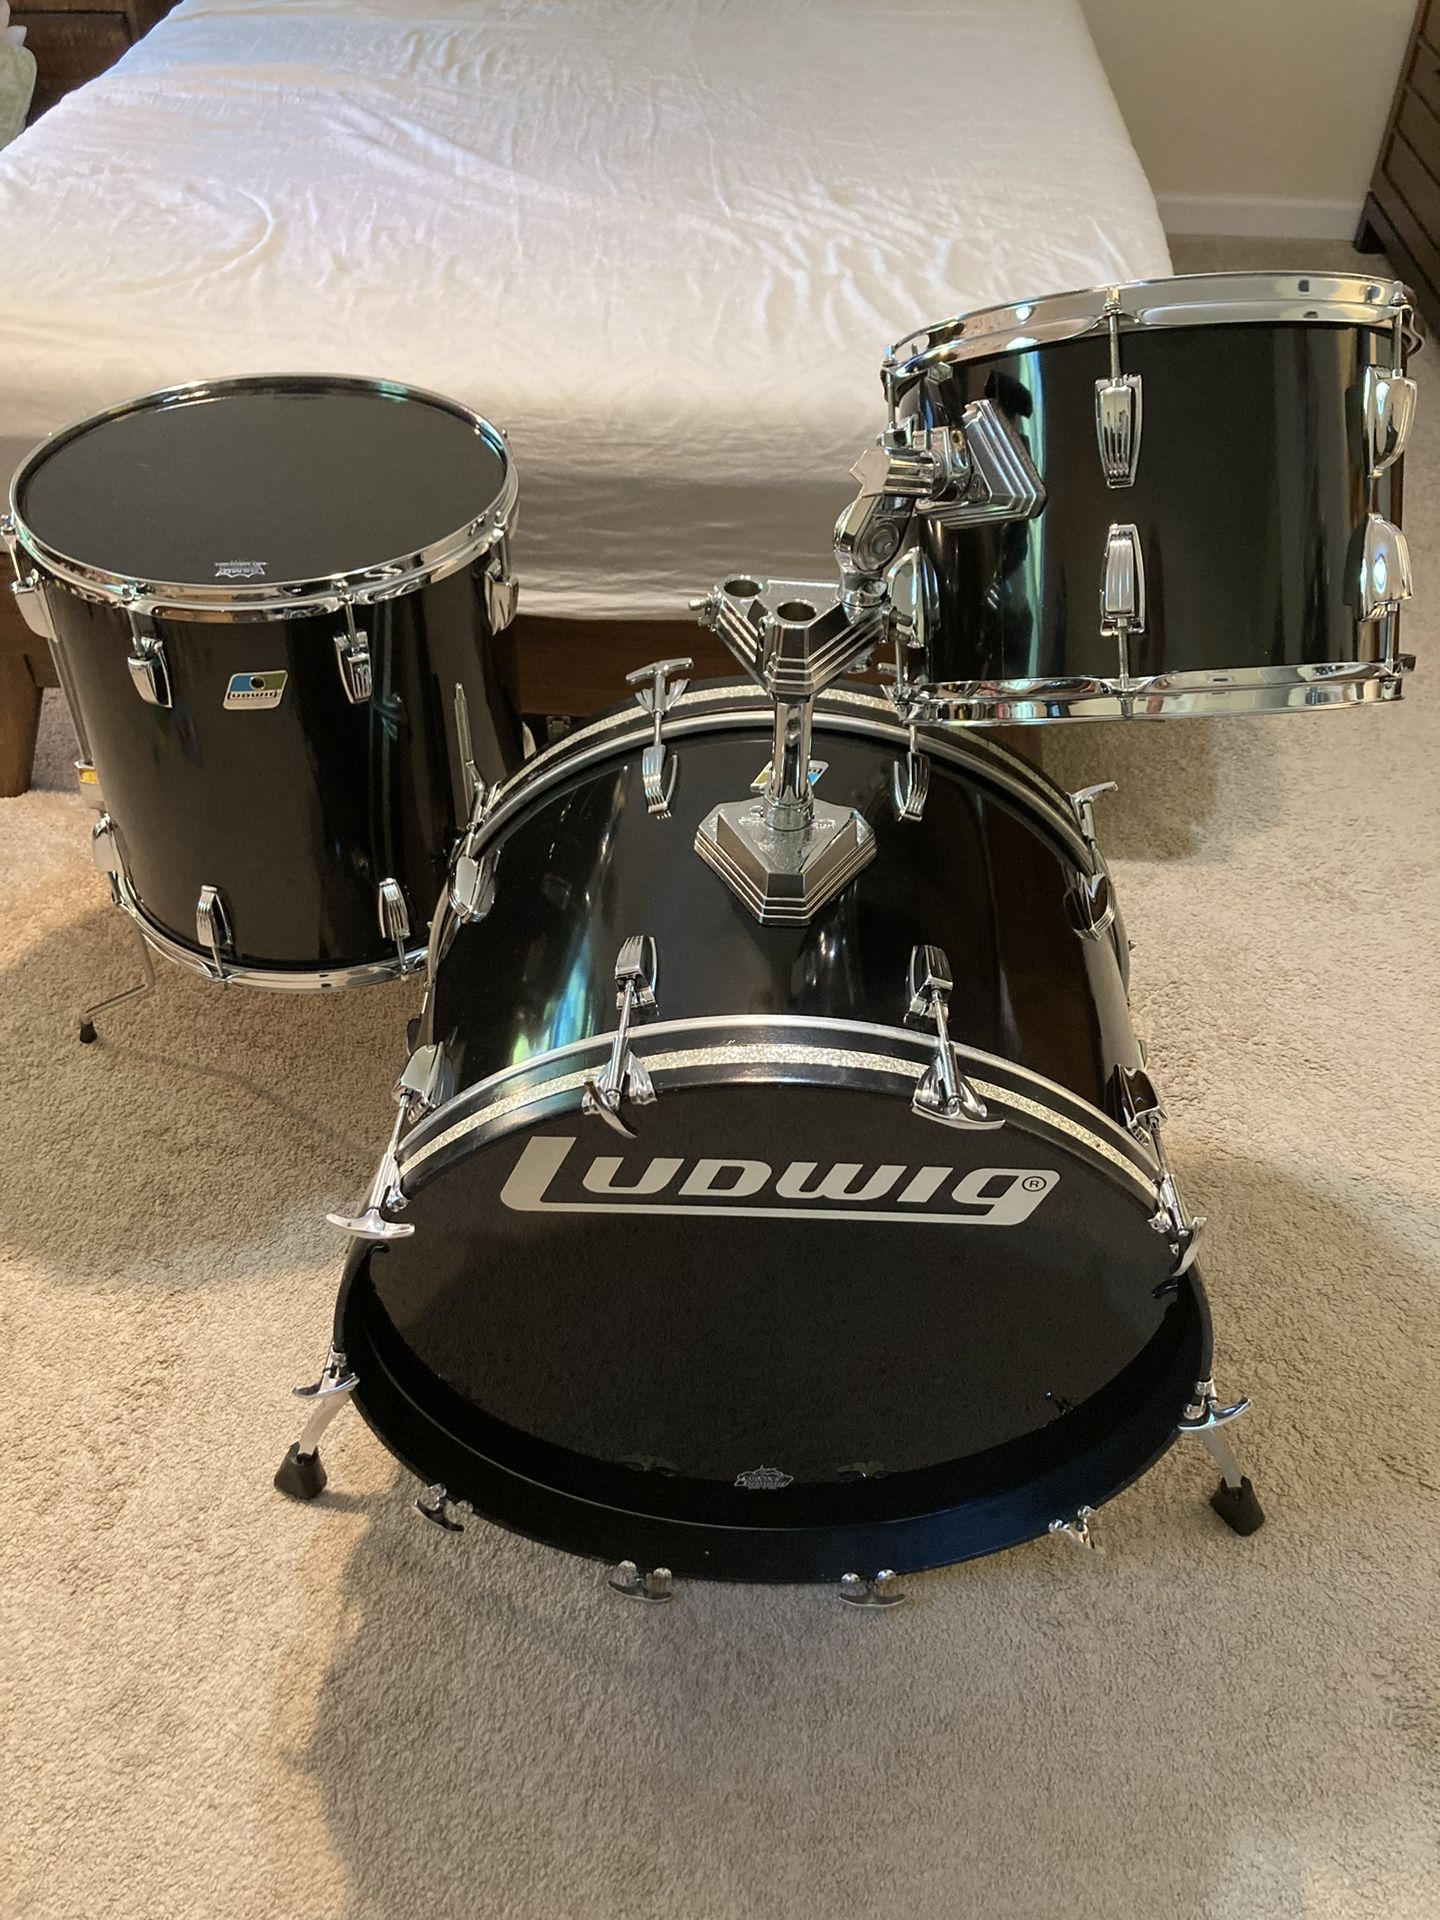 1982 Ludwig USA B/O Badge Drum Set. 24x14 Bass 16x16, 13x9 Toms Black Cortex. 6-ply maple/popular clear shells made in Chicago. Shipping avail